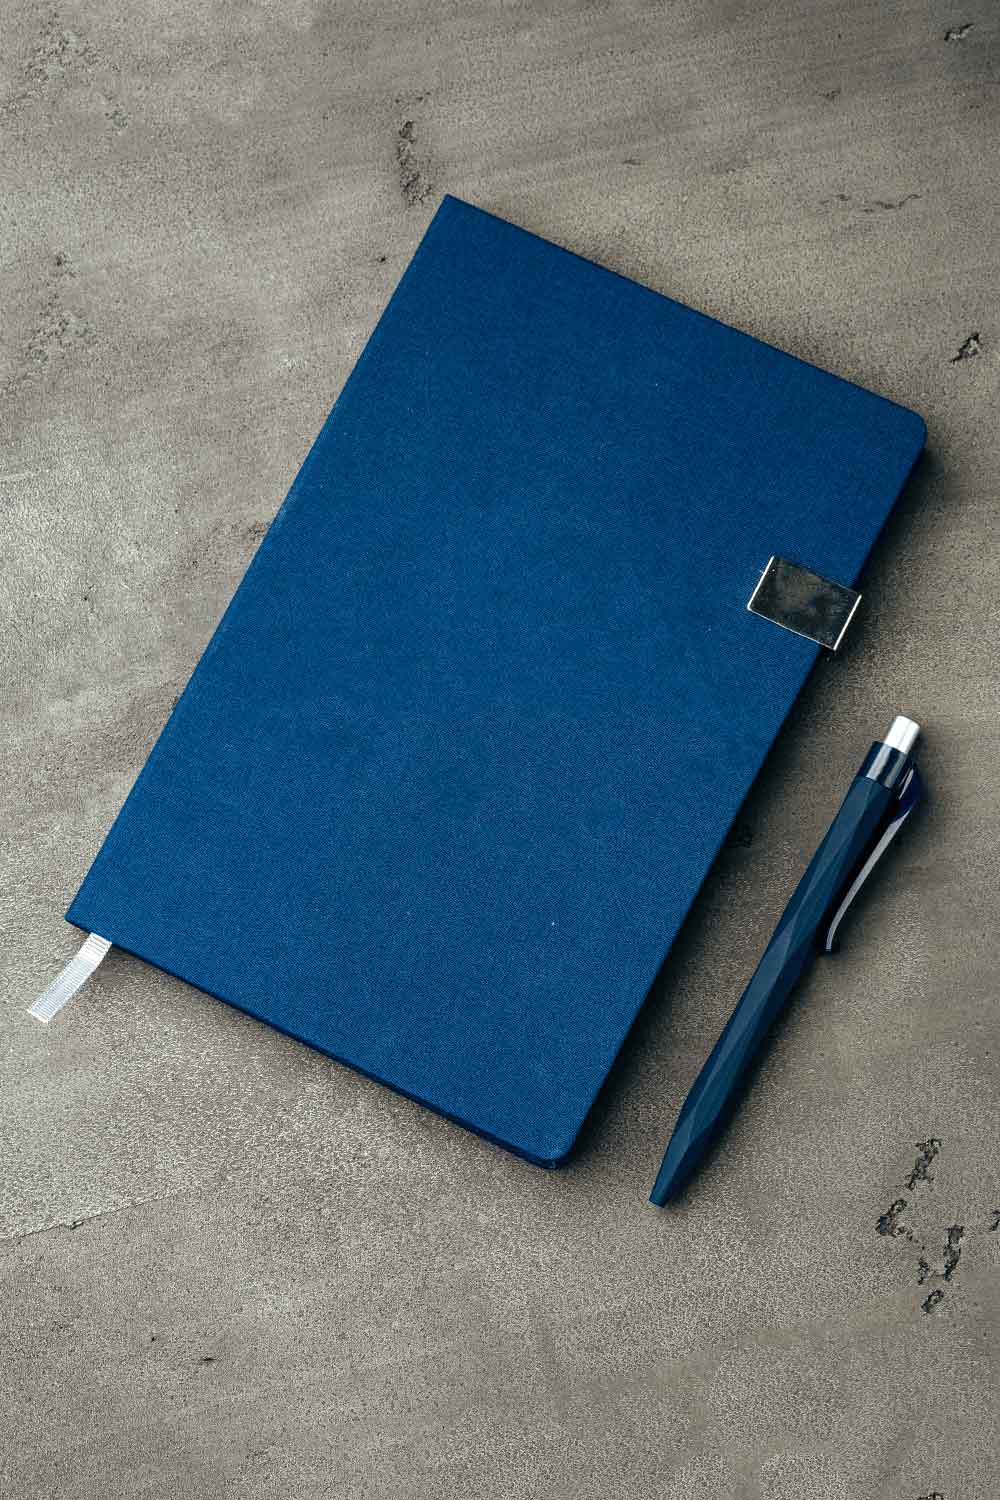 Stylish Notebook Gift for Valentines Day